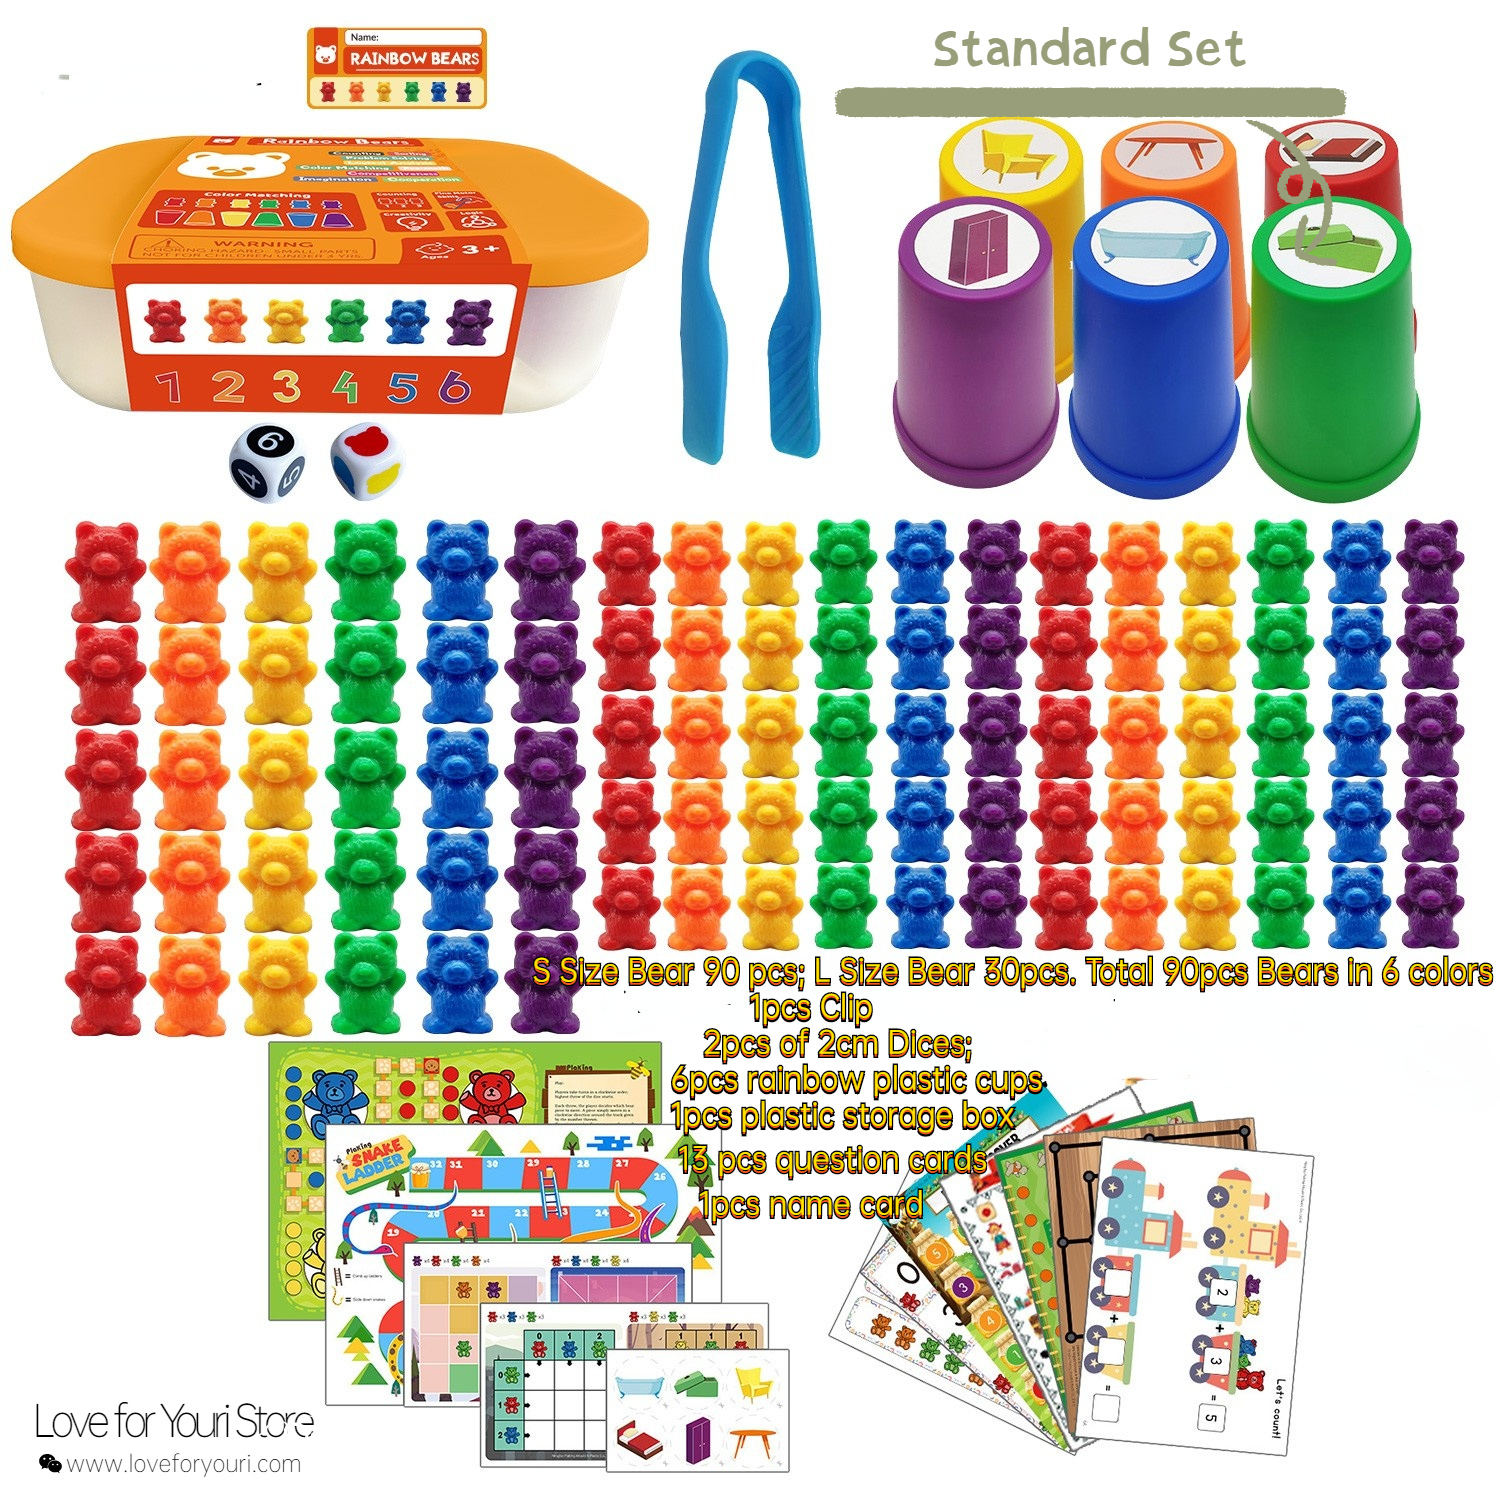 Rainbow Counting Bears with Matching Sorting Cups Seesaw Balance for 102 PCS Counting Sorting Toy STEM Educational Toys Math Counters for Kids Boys Girls Gift Wholesale